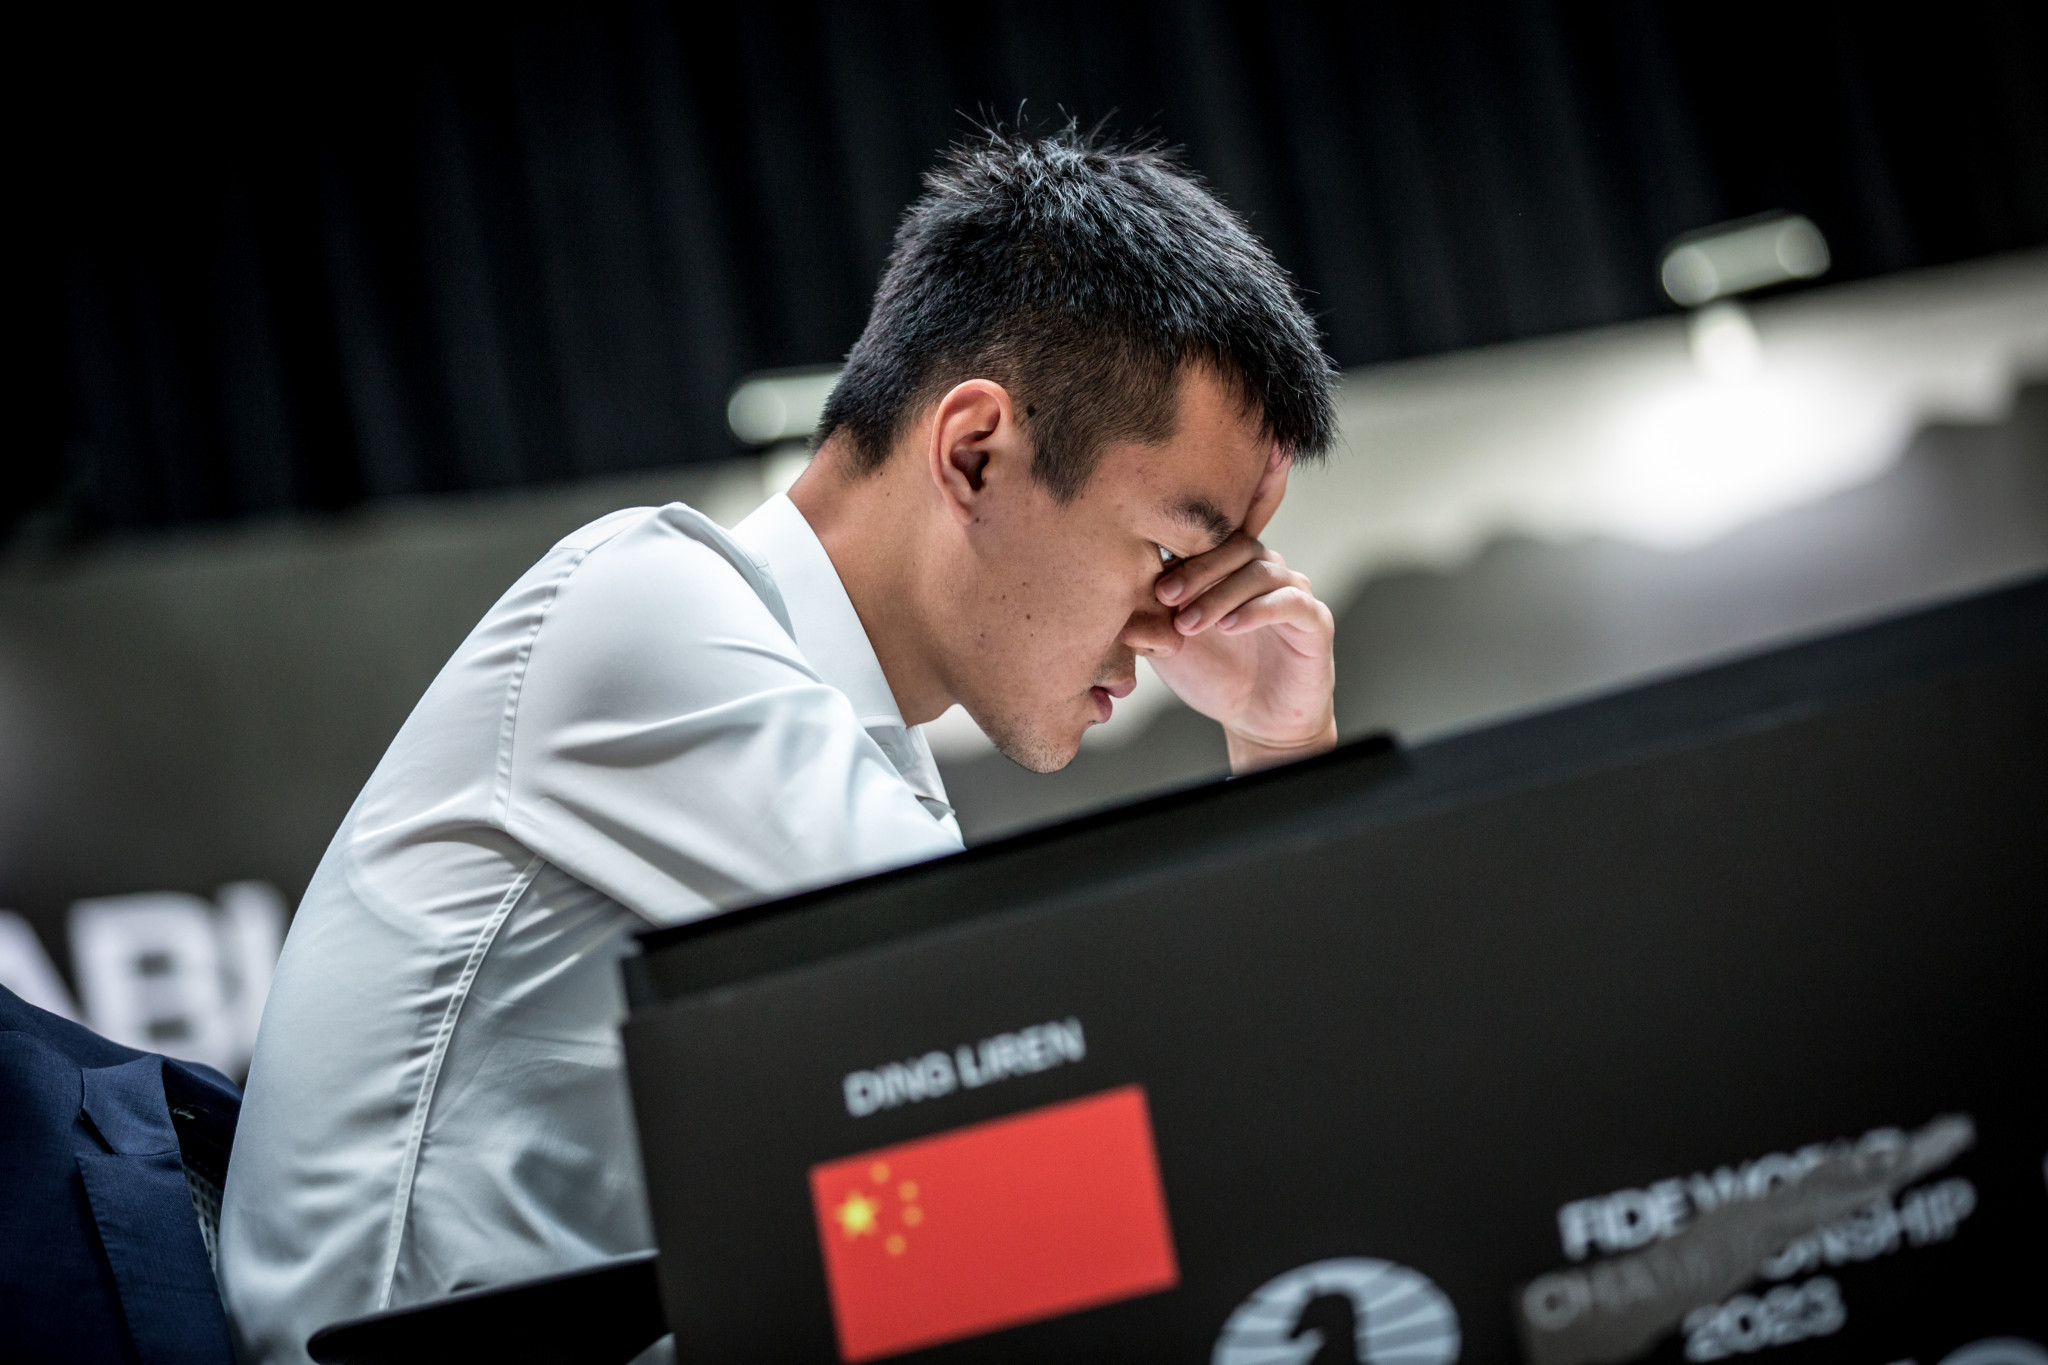 China's Ding Liren was in time trouble and forced to resign with his opponent in control of the second game ©FIDE/Anna Shtourman